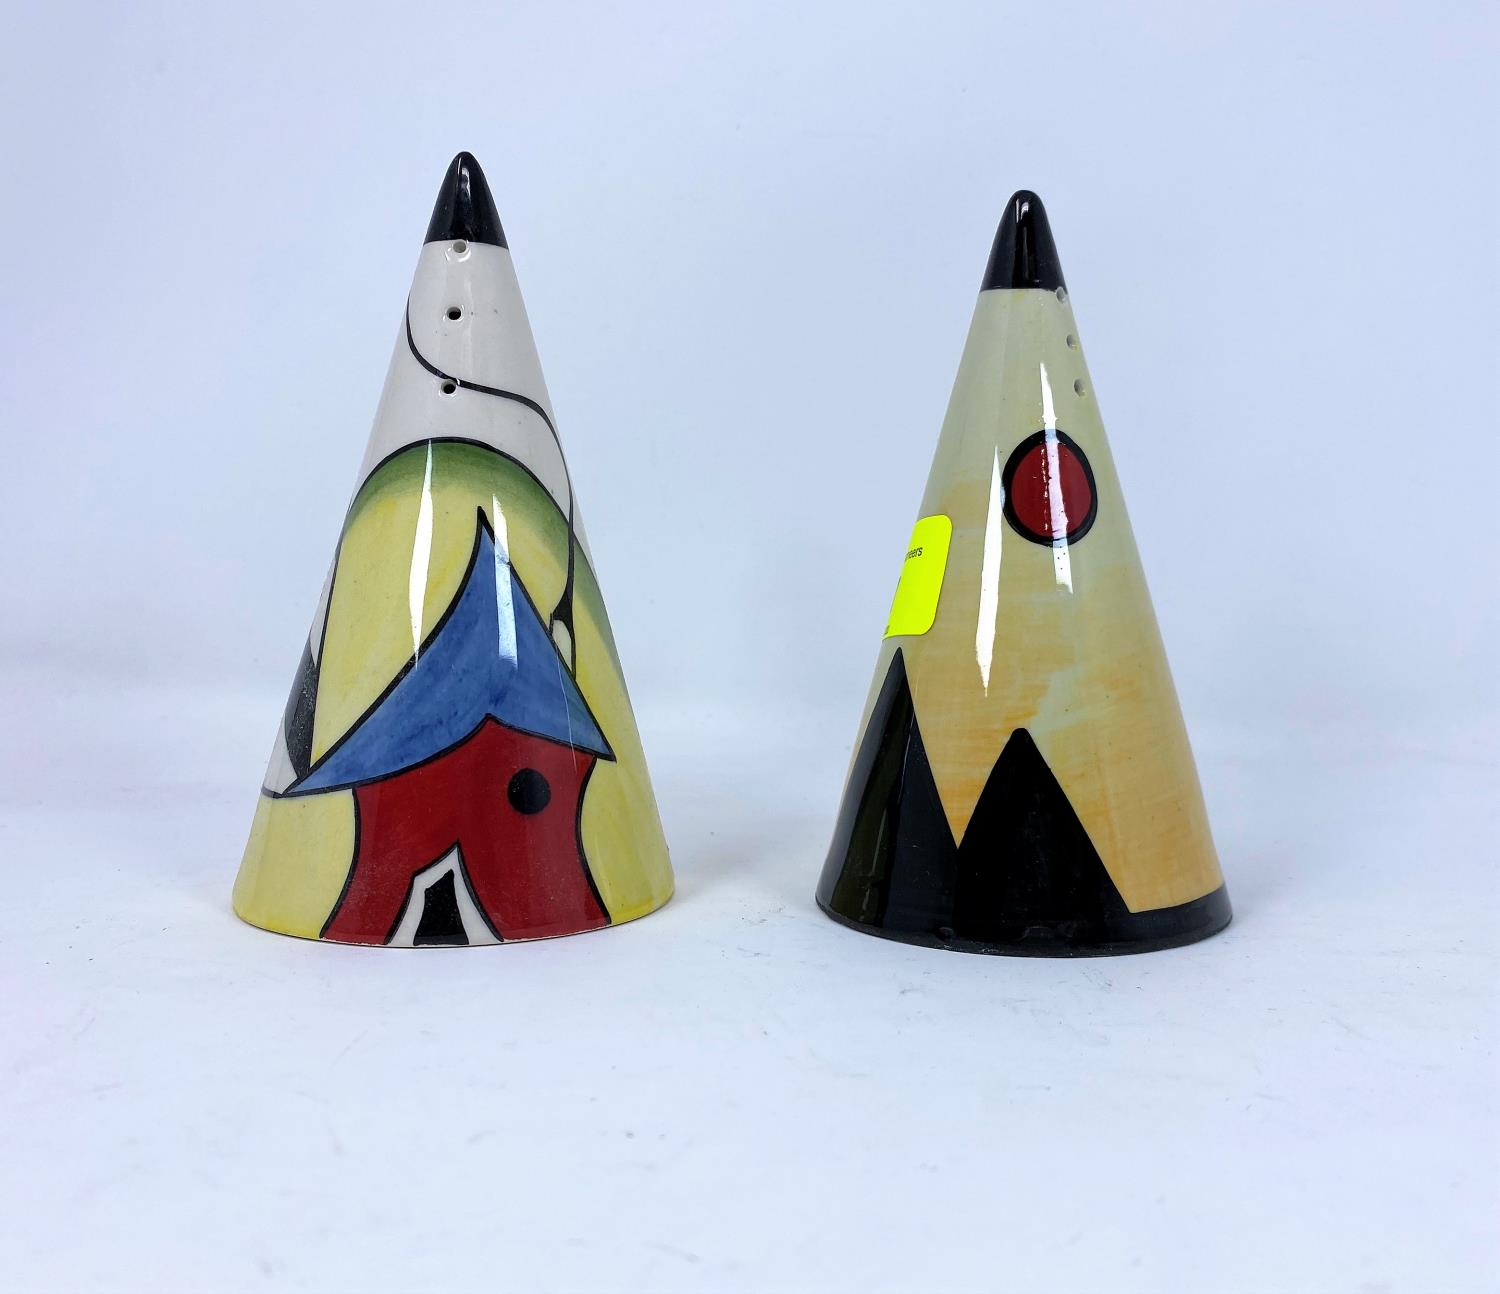 2 Lorna Bailey conical sifters "Porthill" & "Pyramids"